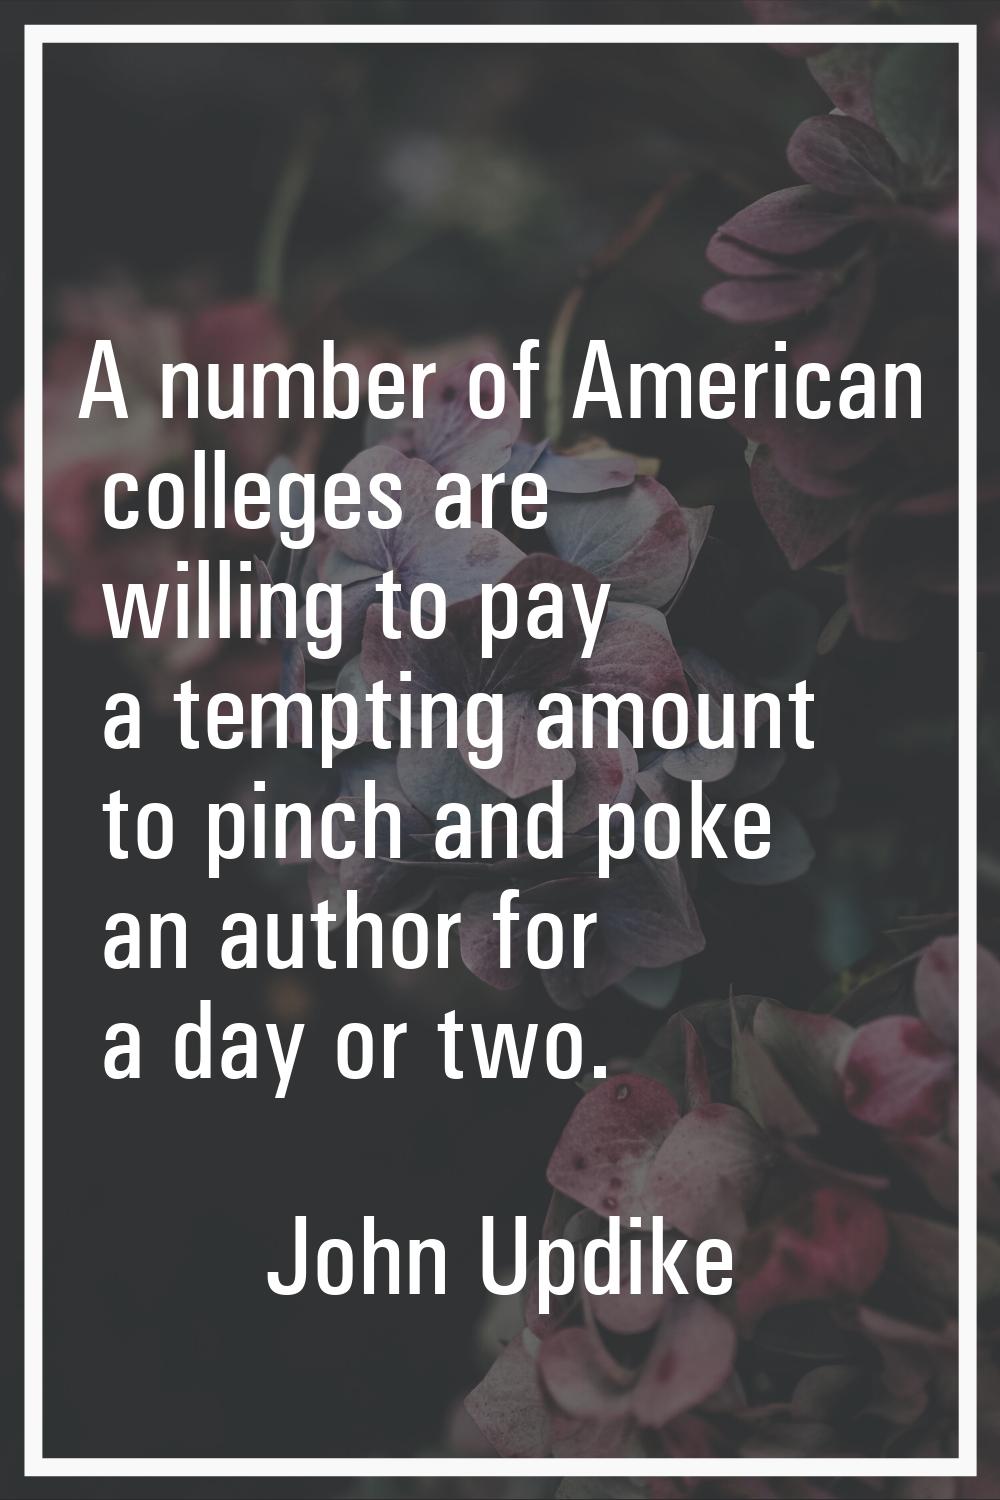 A number of American colleges are willing to pay a tempting amount to pinch and poke an author for 